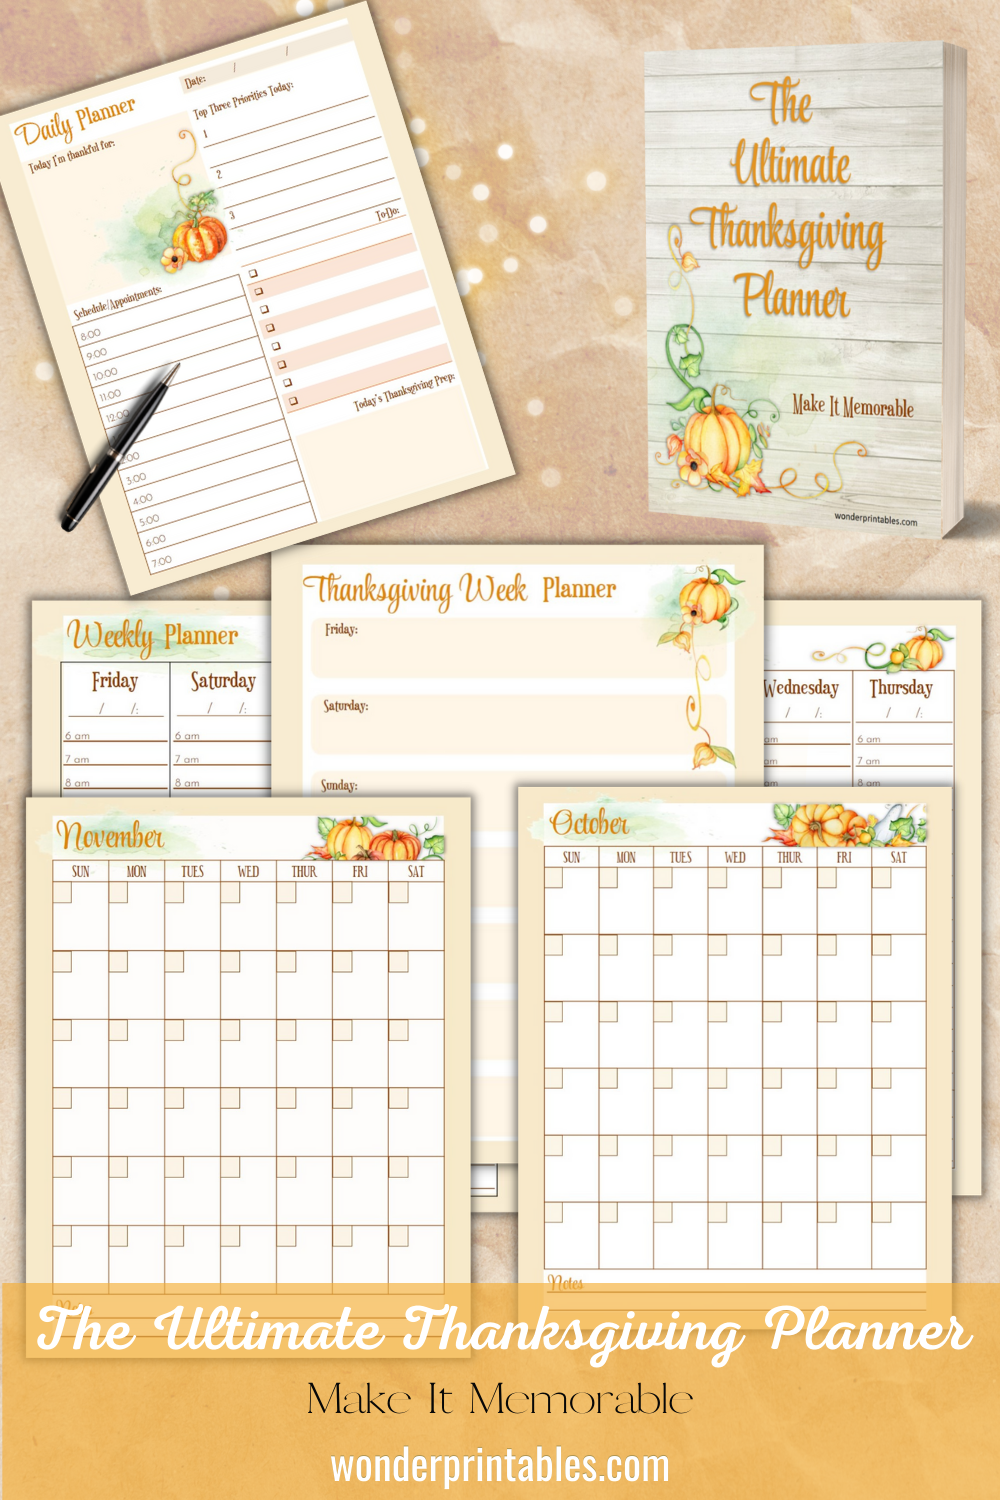 The Ultimate Thanksgiving Planner